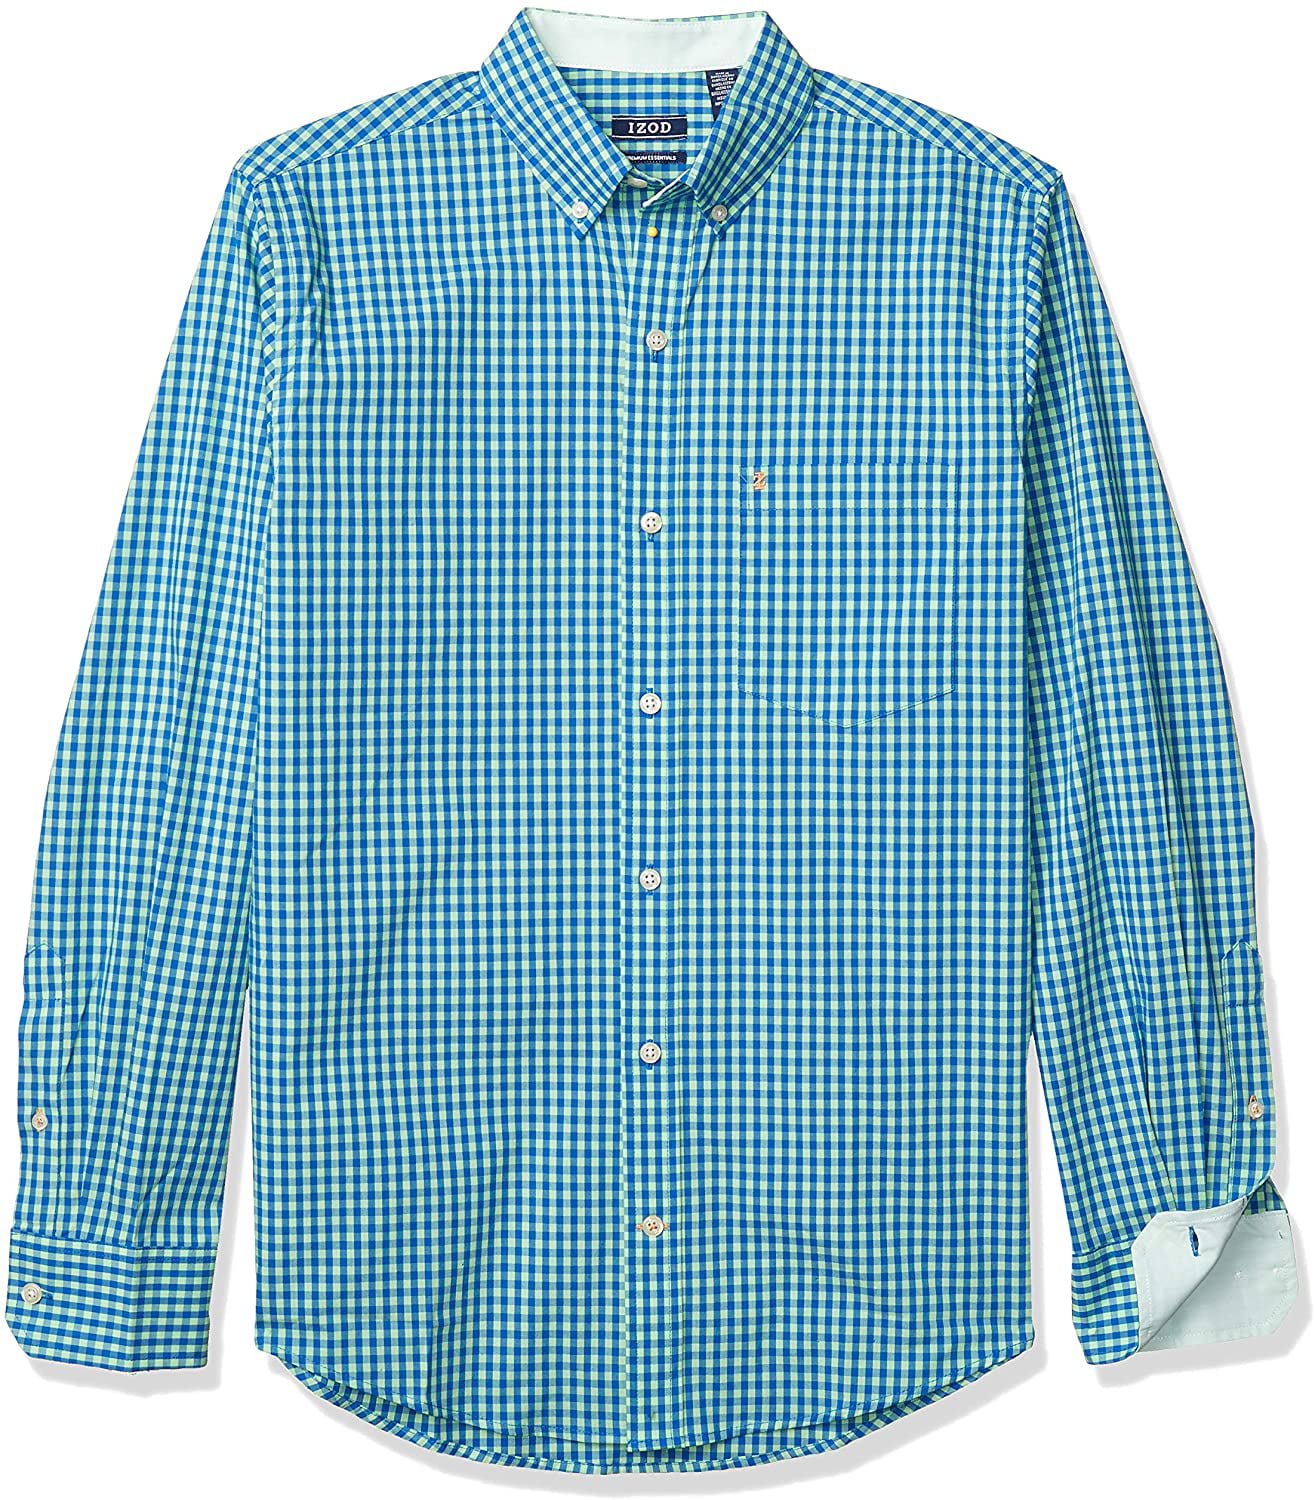 Discontinued IZOD Mens Big and Tall Button Down Long Sleeve Performance Plaid Shirt 